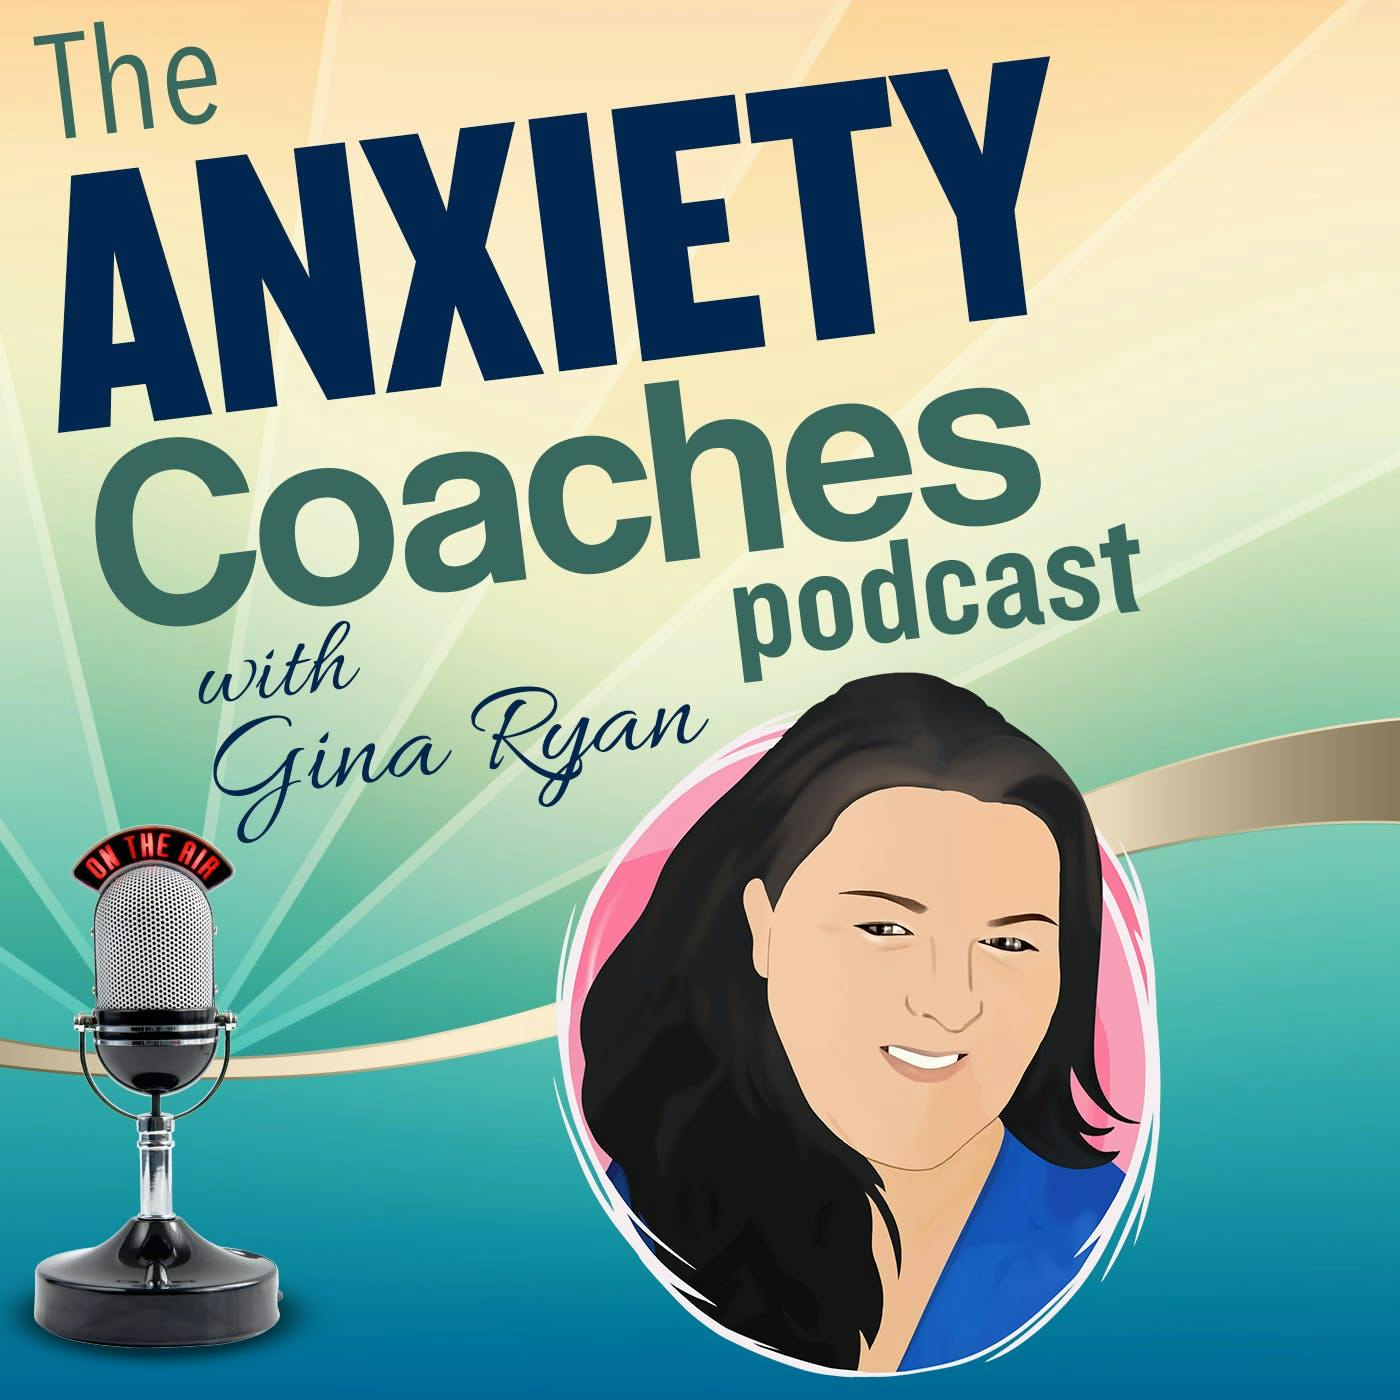 793: The Cycle of Stress Physical Pain and Anxiety